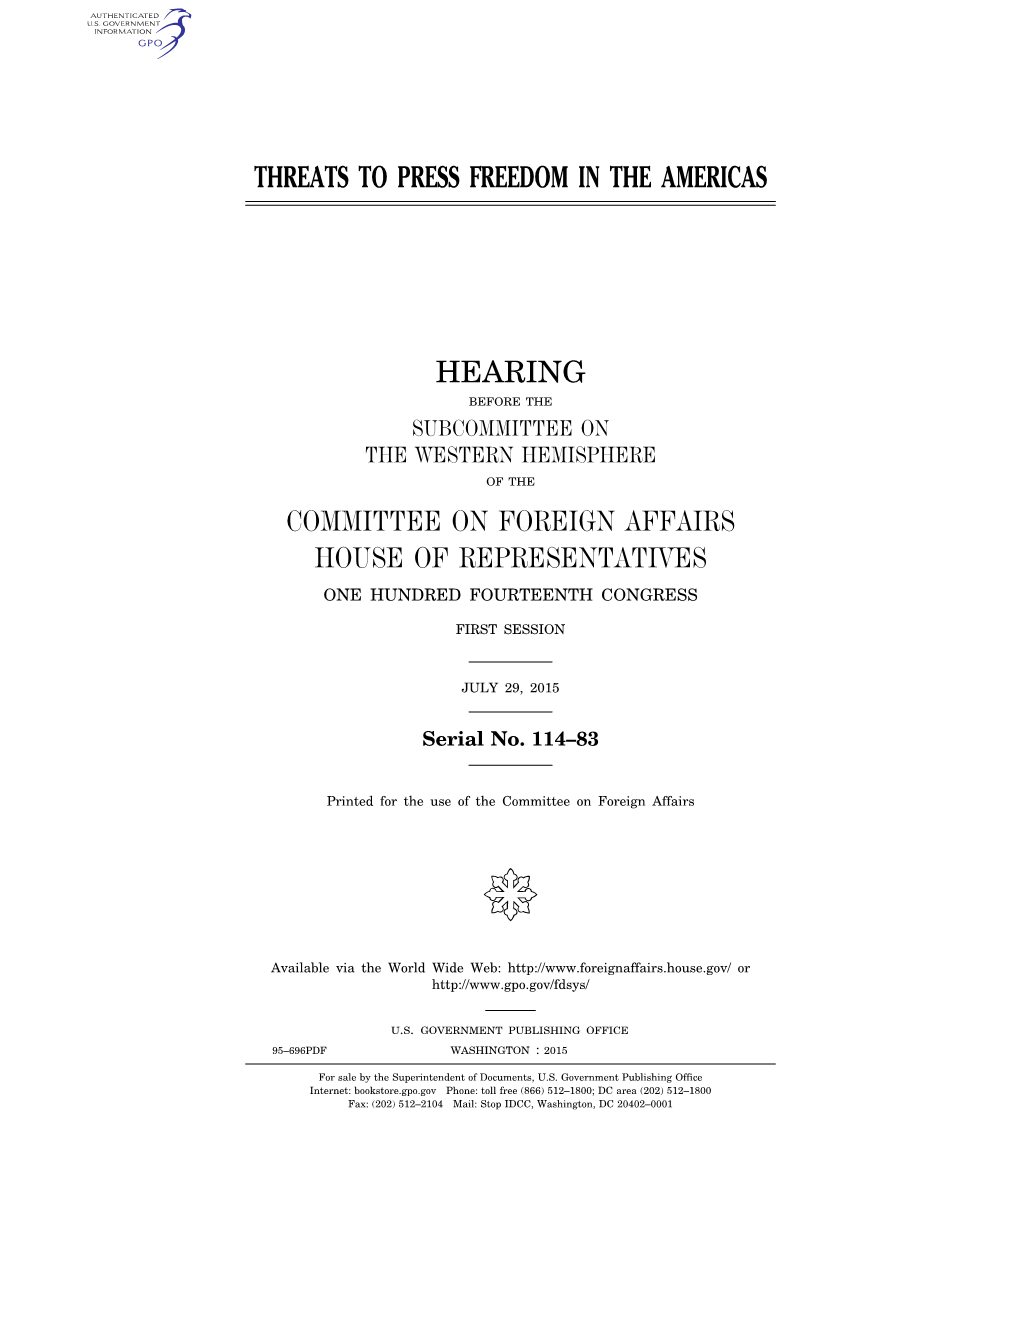 Threats to Press Freedom in the Americas Hearing